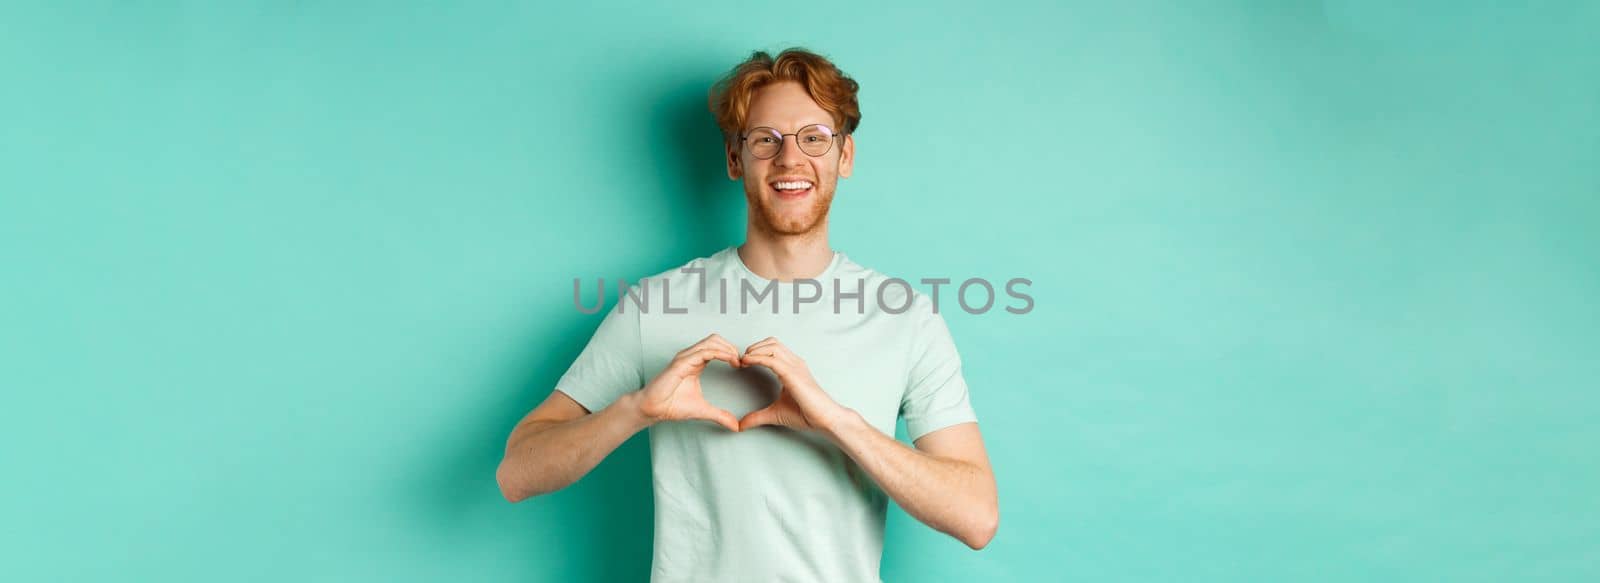 Valentines day and relationship concept. Happy boyfriend with red hair and beard, wearing glasses and t-shirt, showing heart sign and saying I love you, standing over turquoise background by Benzoix